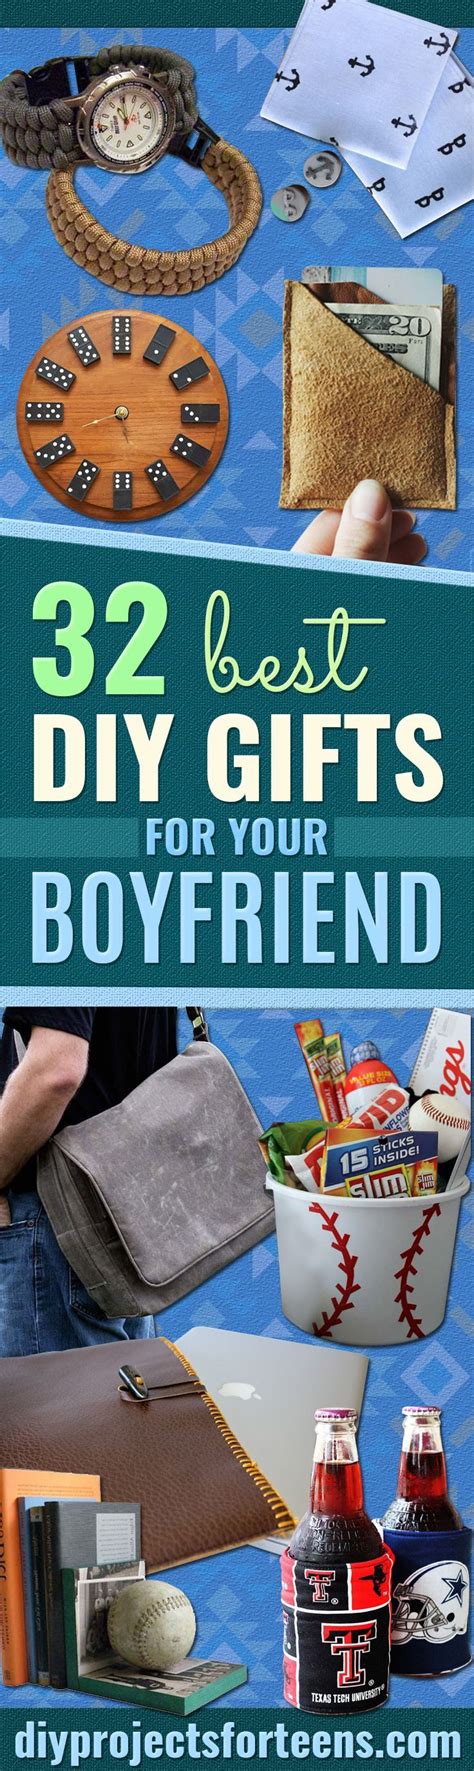 If you give them tickets to something toy can do together they'll definitely appreciate it, especially if it's something you both enjoy. 32 DIY Gifts for Your Boyfriend | Diy gifts for boyfriend ...